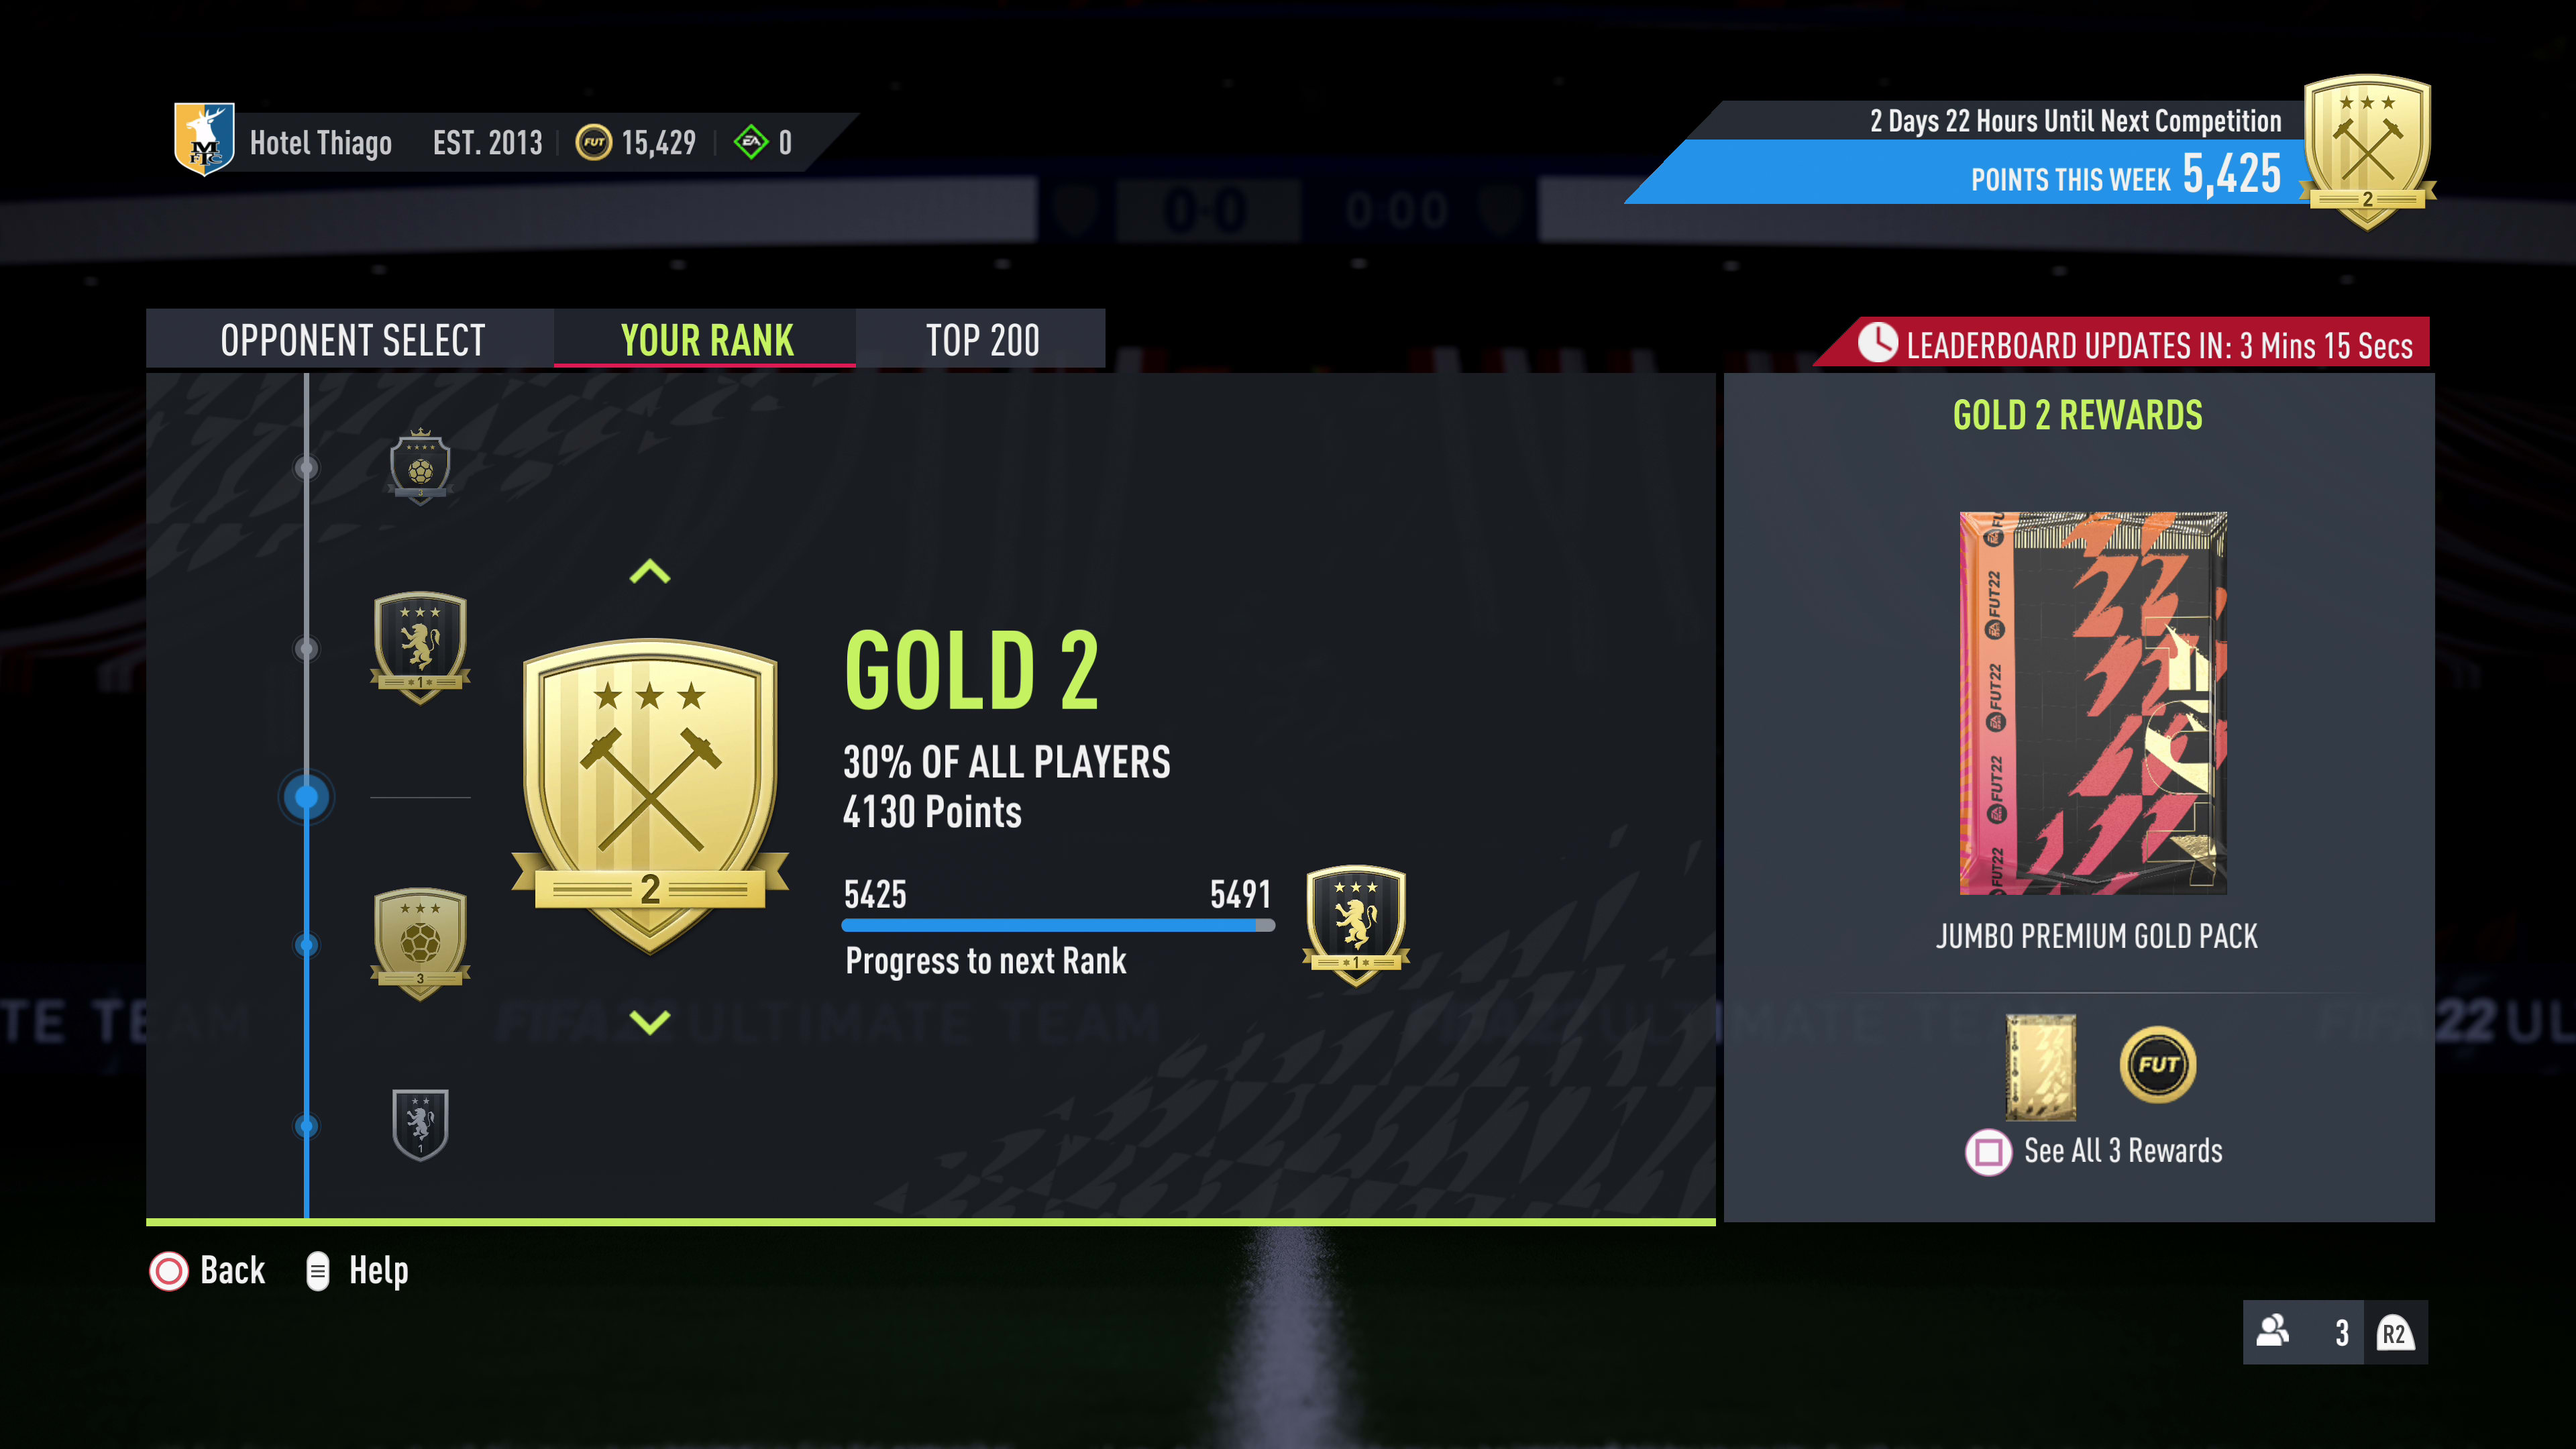 FIFAUTeam on X: You can claim your Squad Battles rewards on the